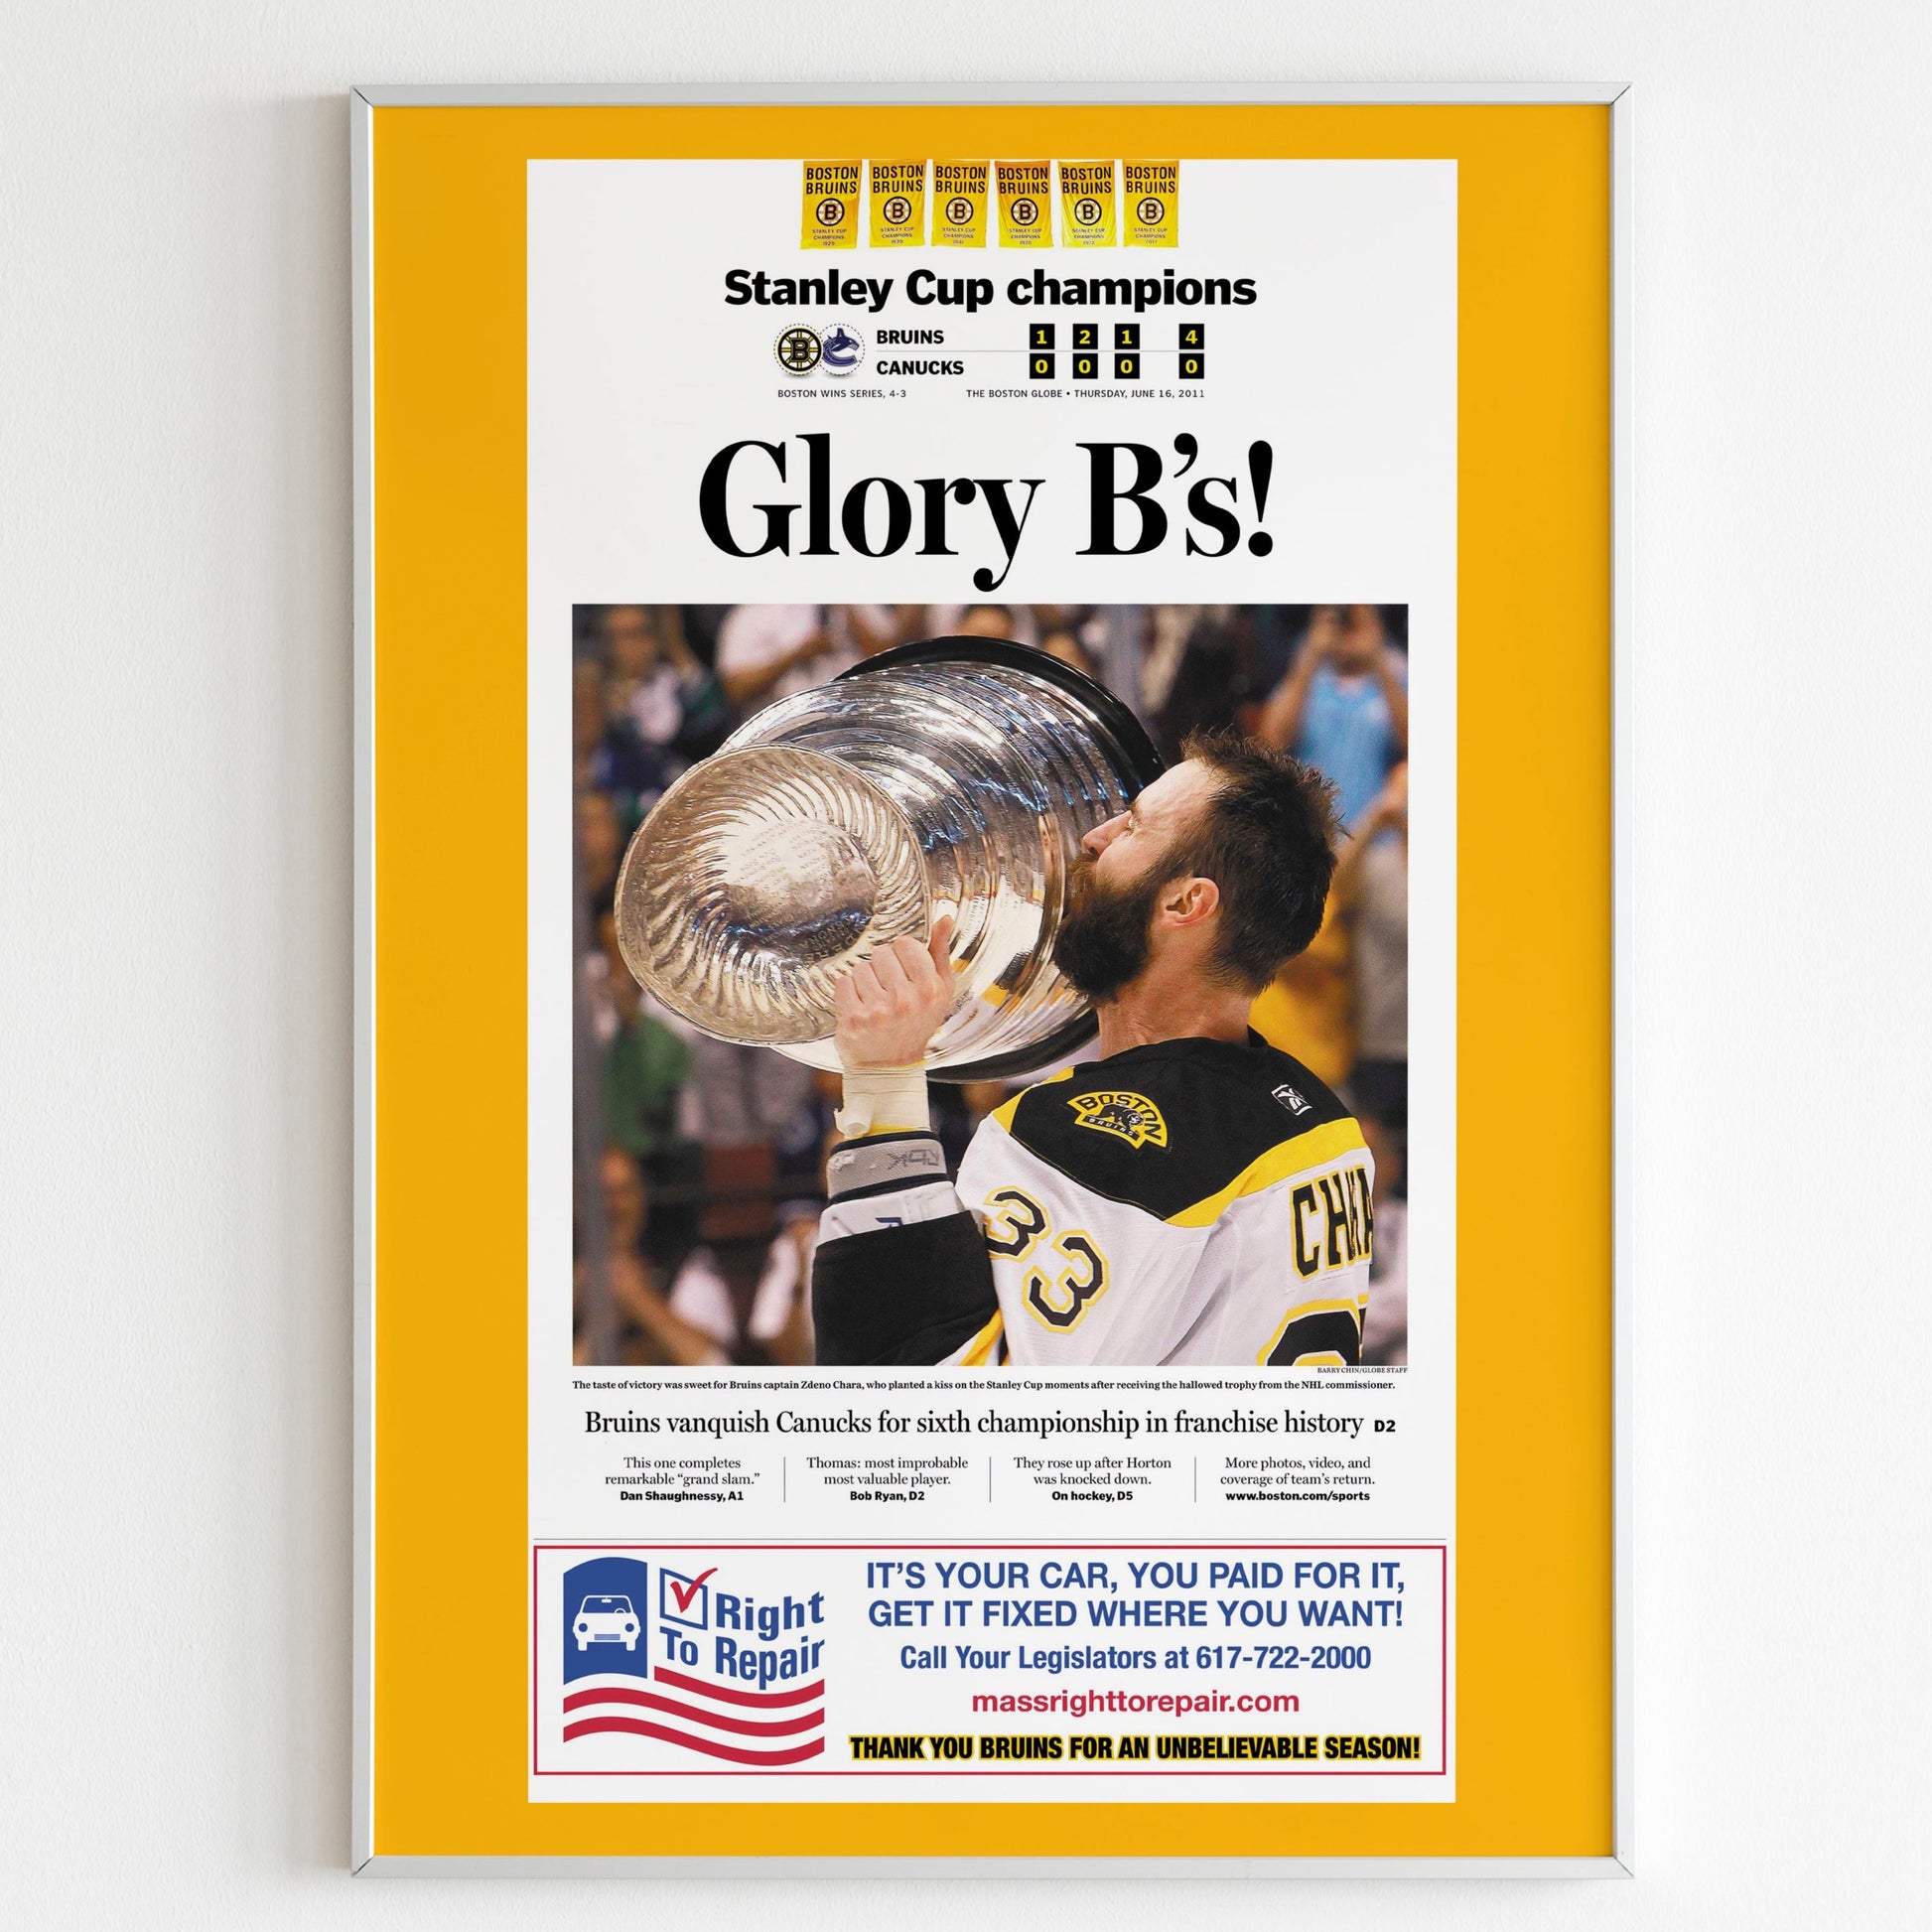 Boston Bruins 2011 NHL Stanley Cup Champions Front Cover The Boston Globe Poster, Hockey Team Magazine Print, Newspaper Front Page